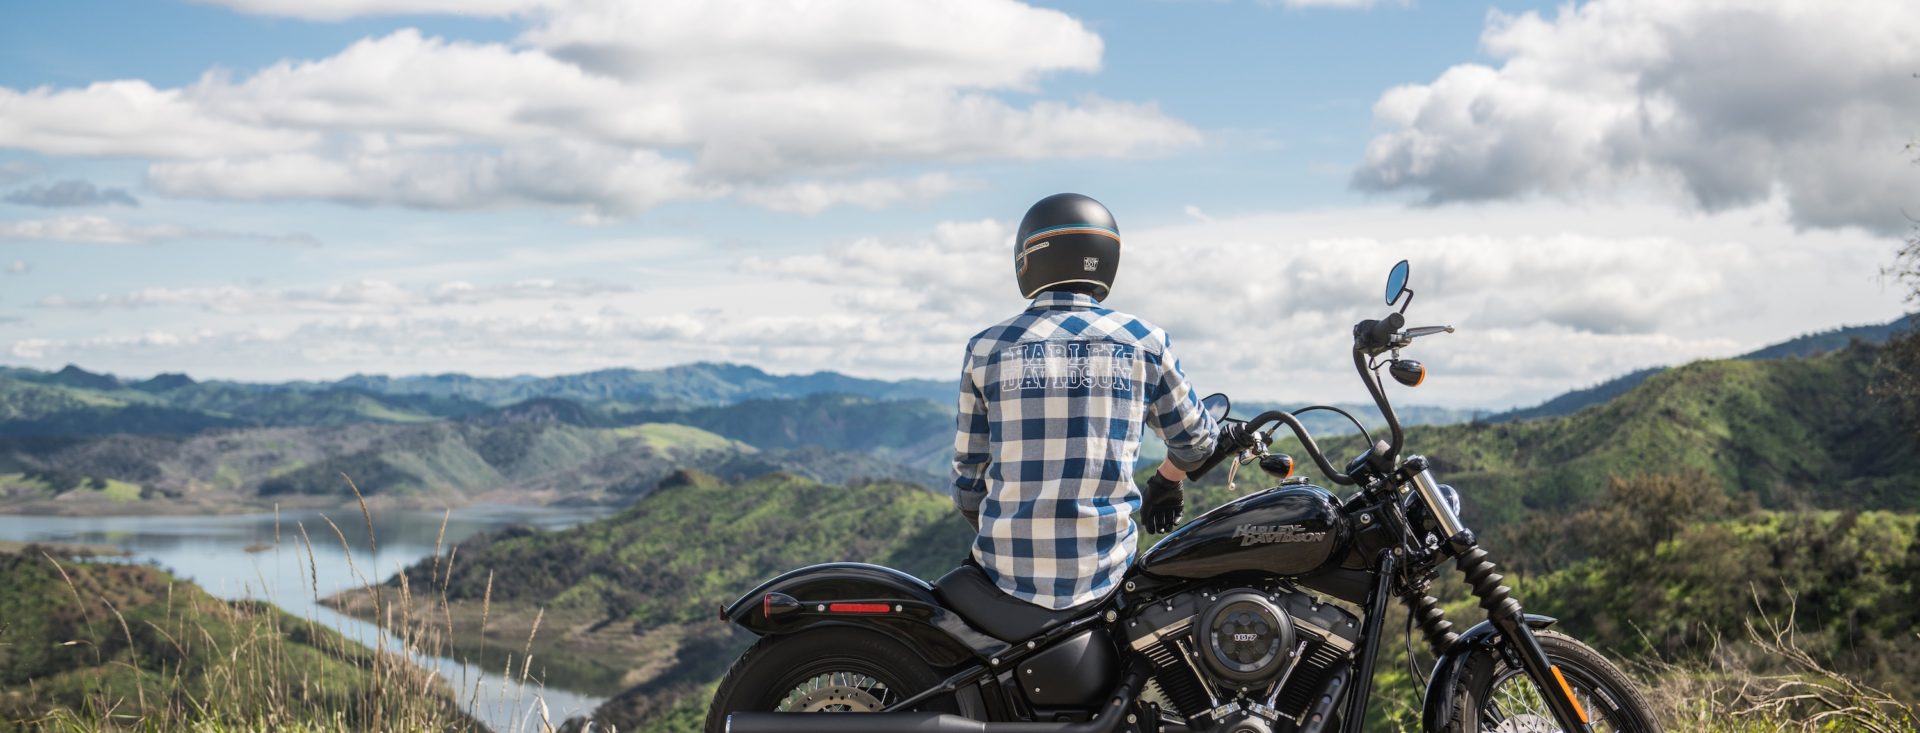 Ride On™ Motorcycle Insurance